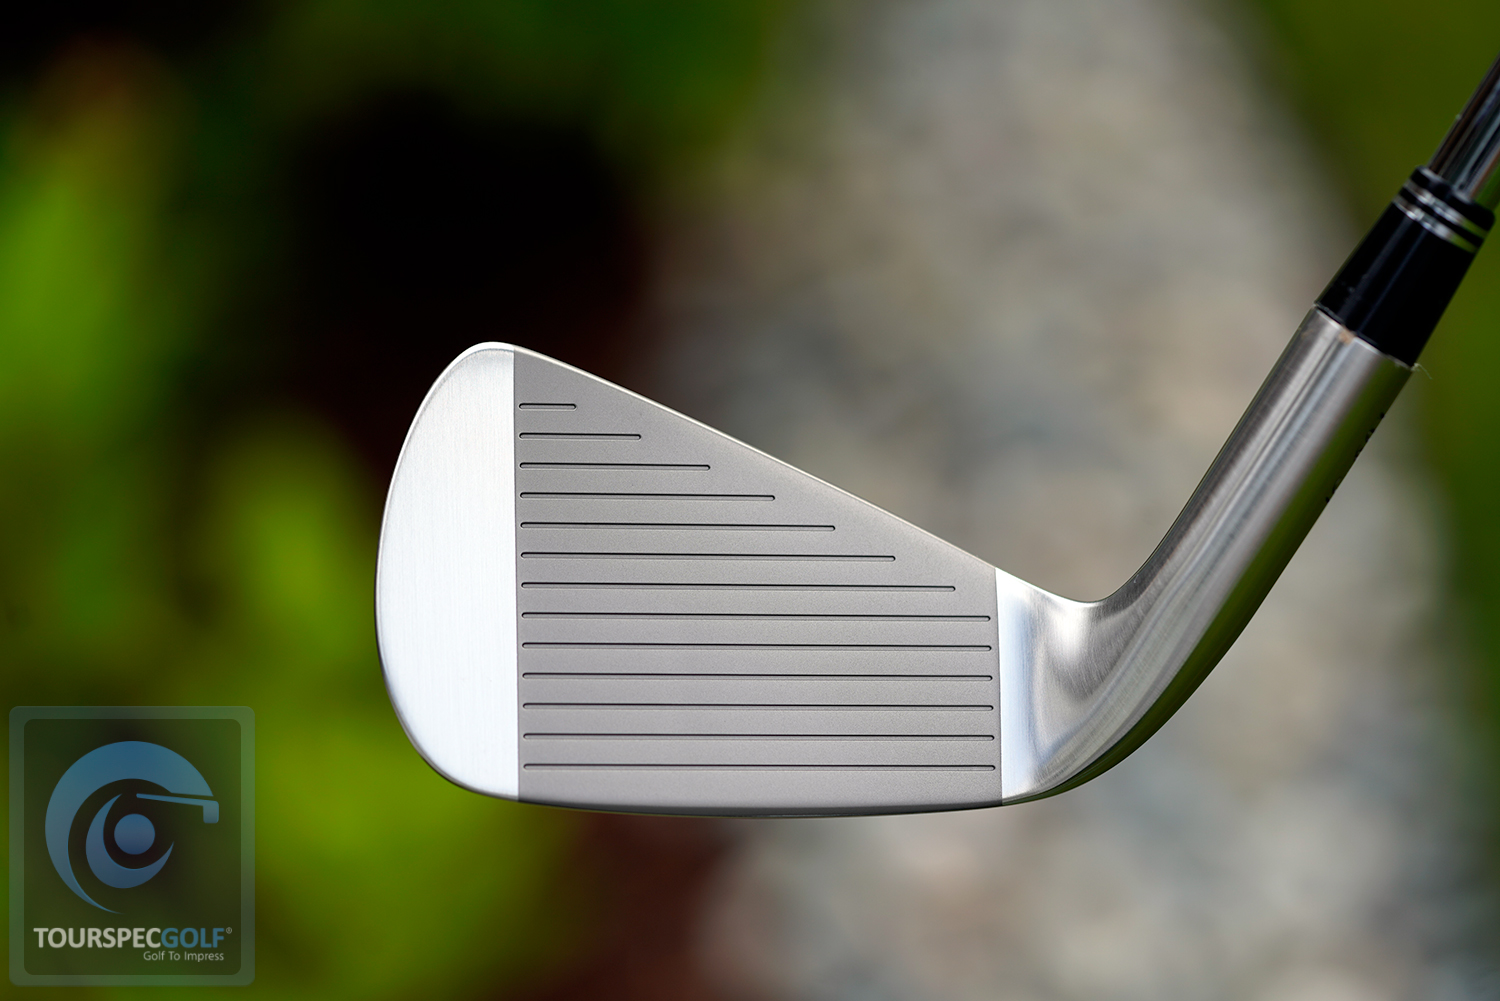 The New Miura IC-601 Irons Initial Impressions - TourSpecGolf Golf Blog